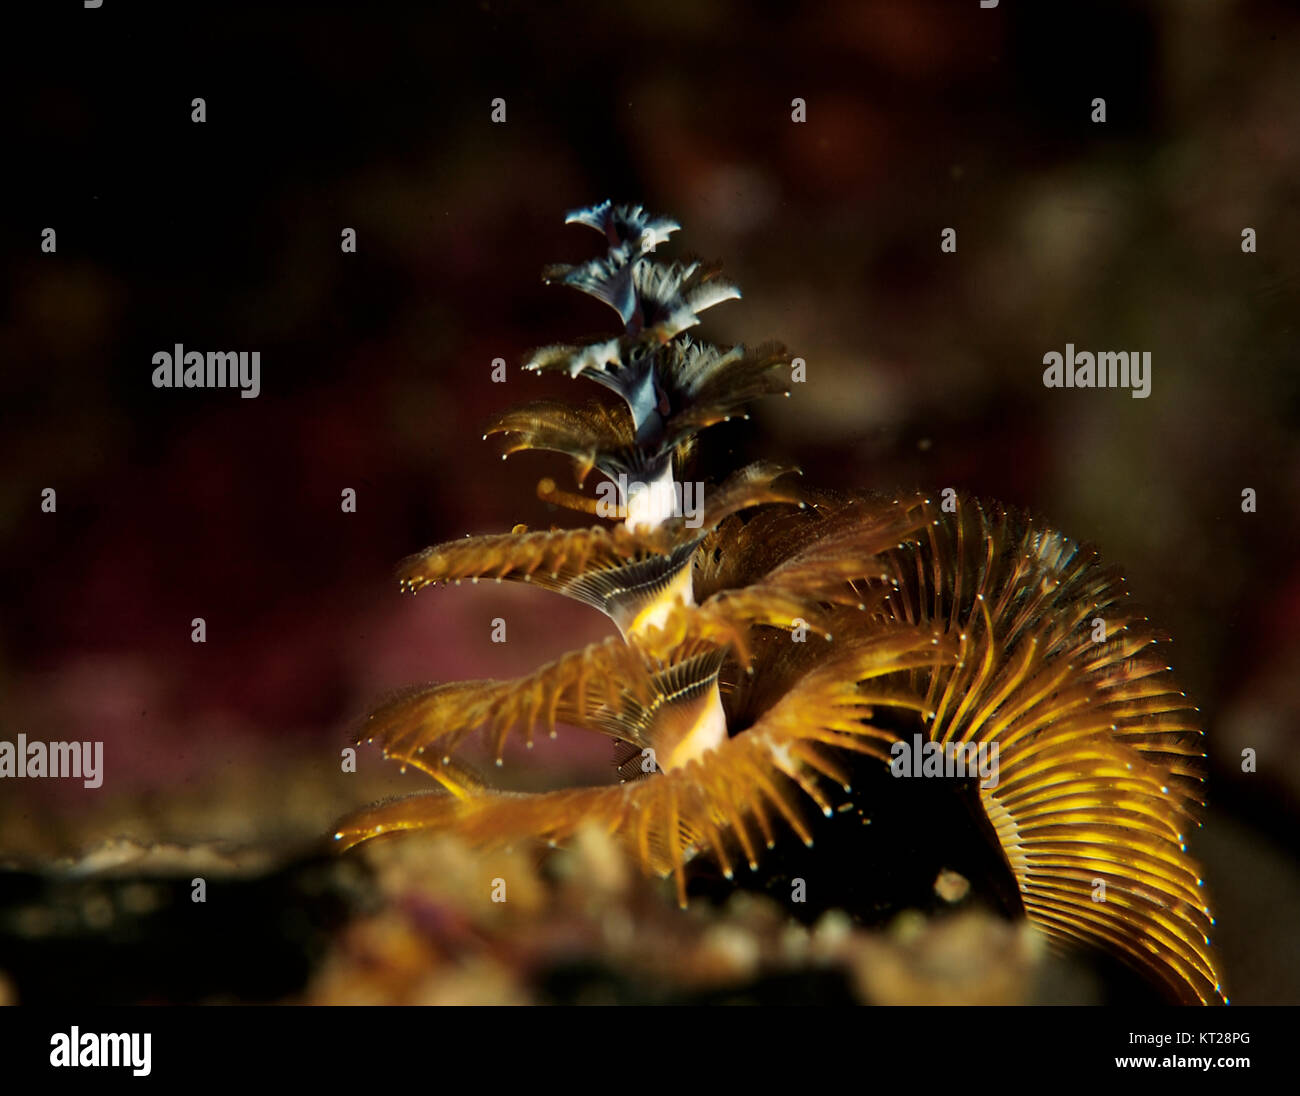 UNDERWATER SEA LIFE PATTERNS RESEMBLING A CHRISTMAS TREE Stock Photo